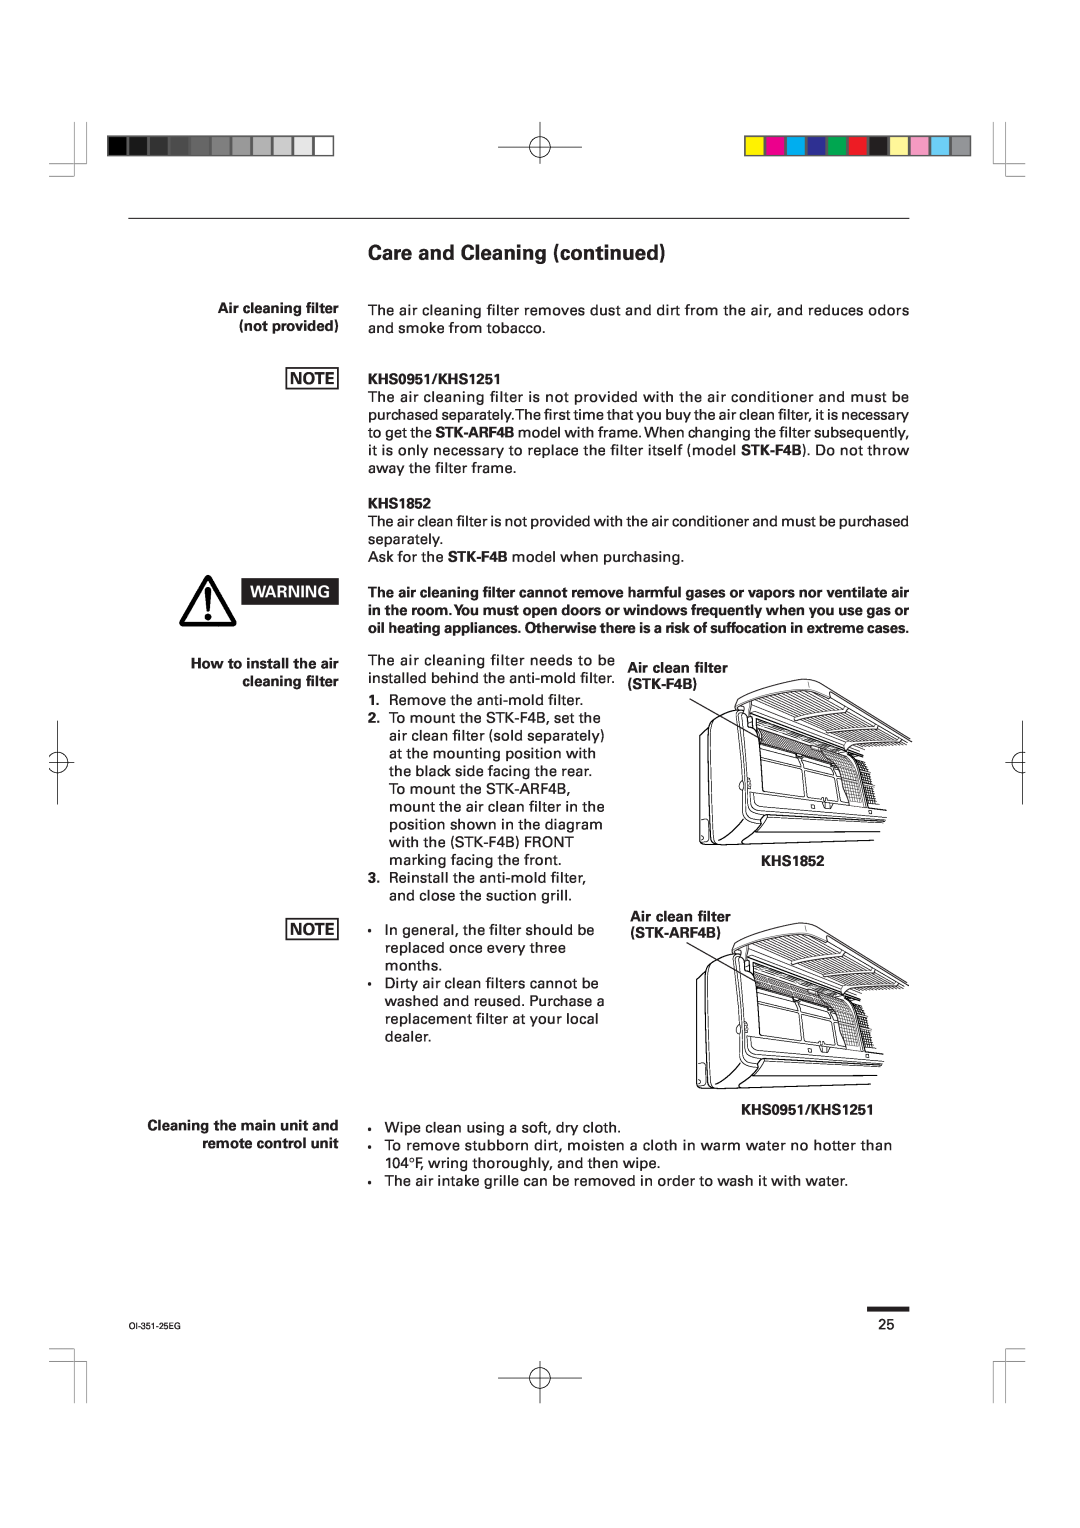 Sanyo instruction manual Care and Cleaning continued, KHS0951/KHS1251, KHS1852, How to install the air cleaning filter 